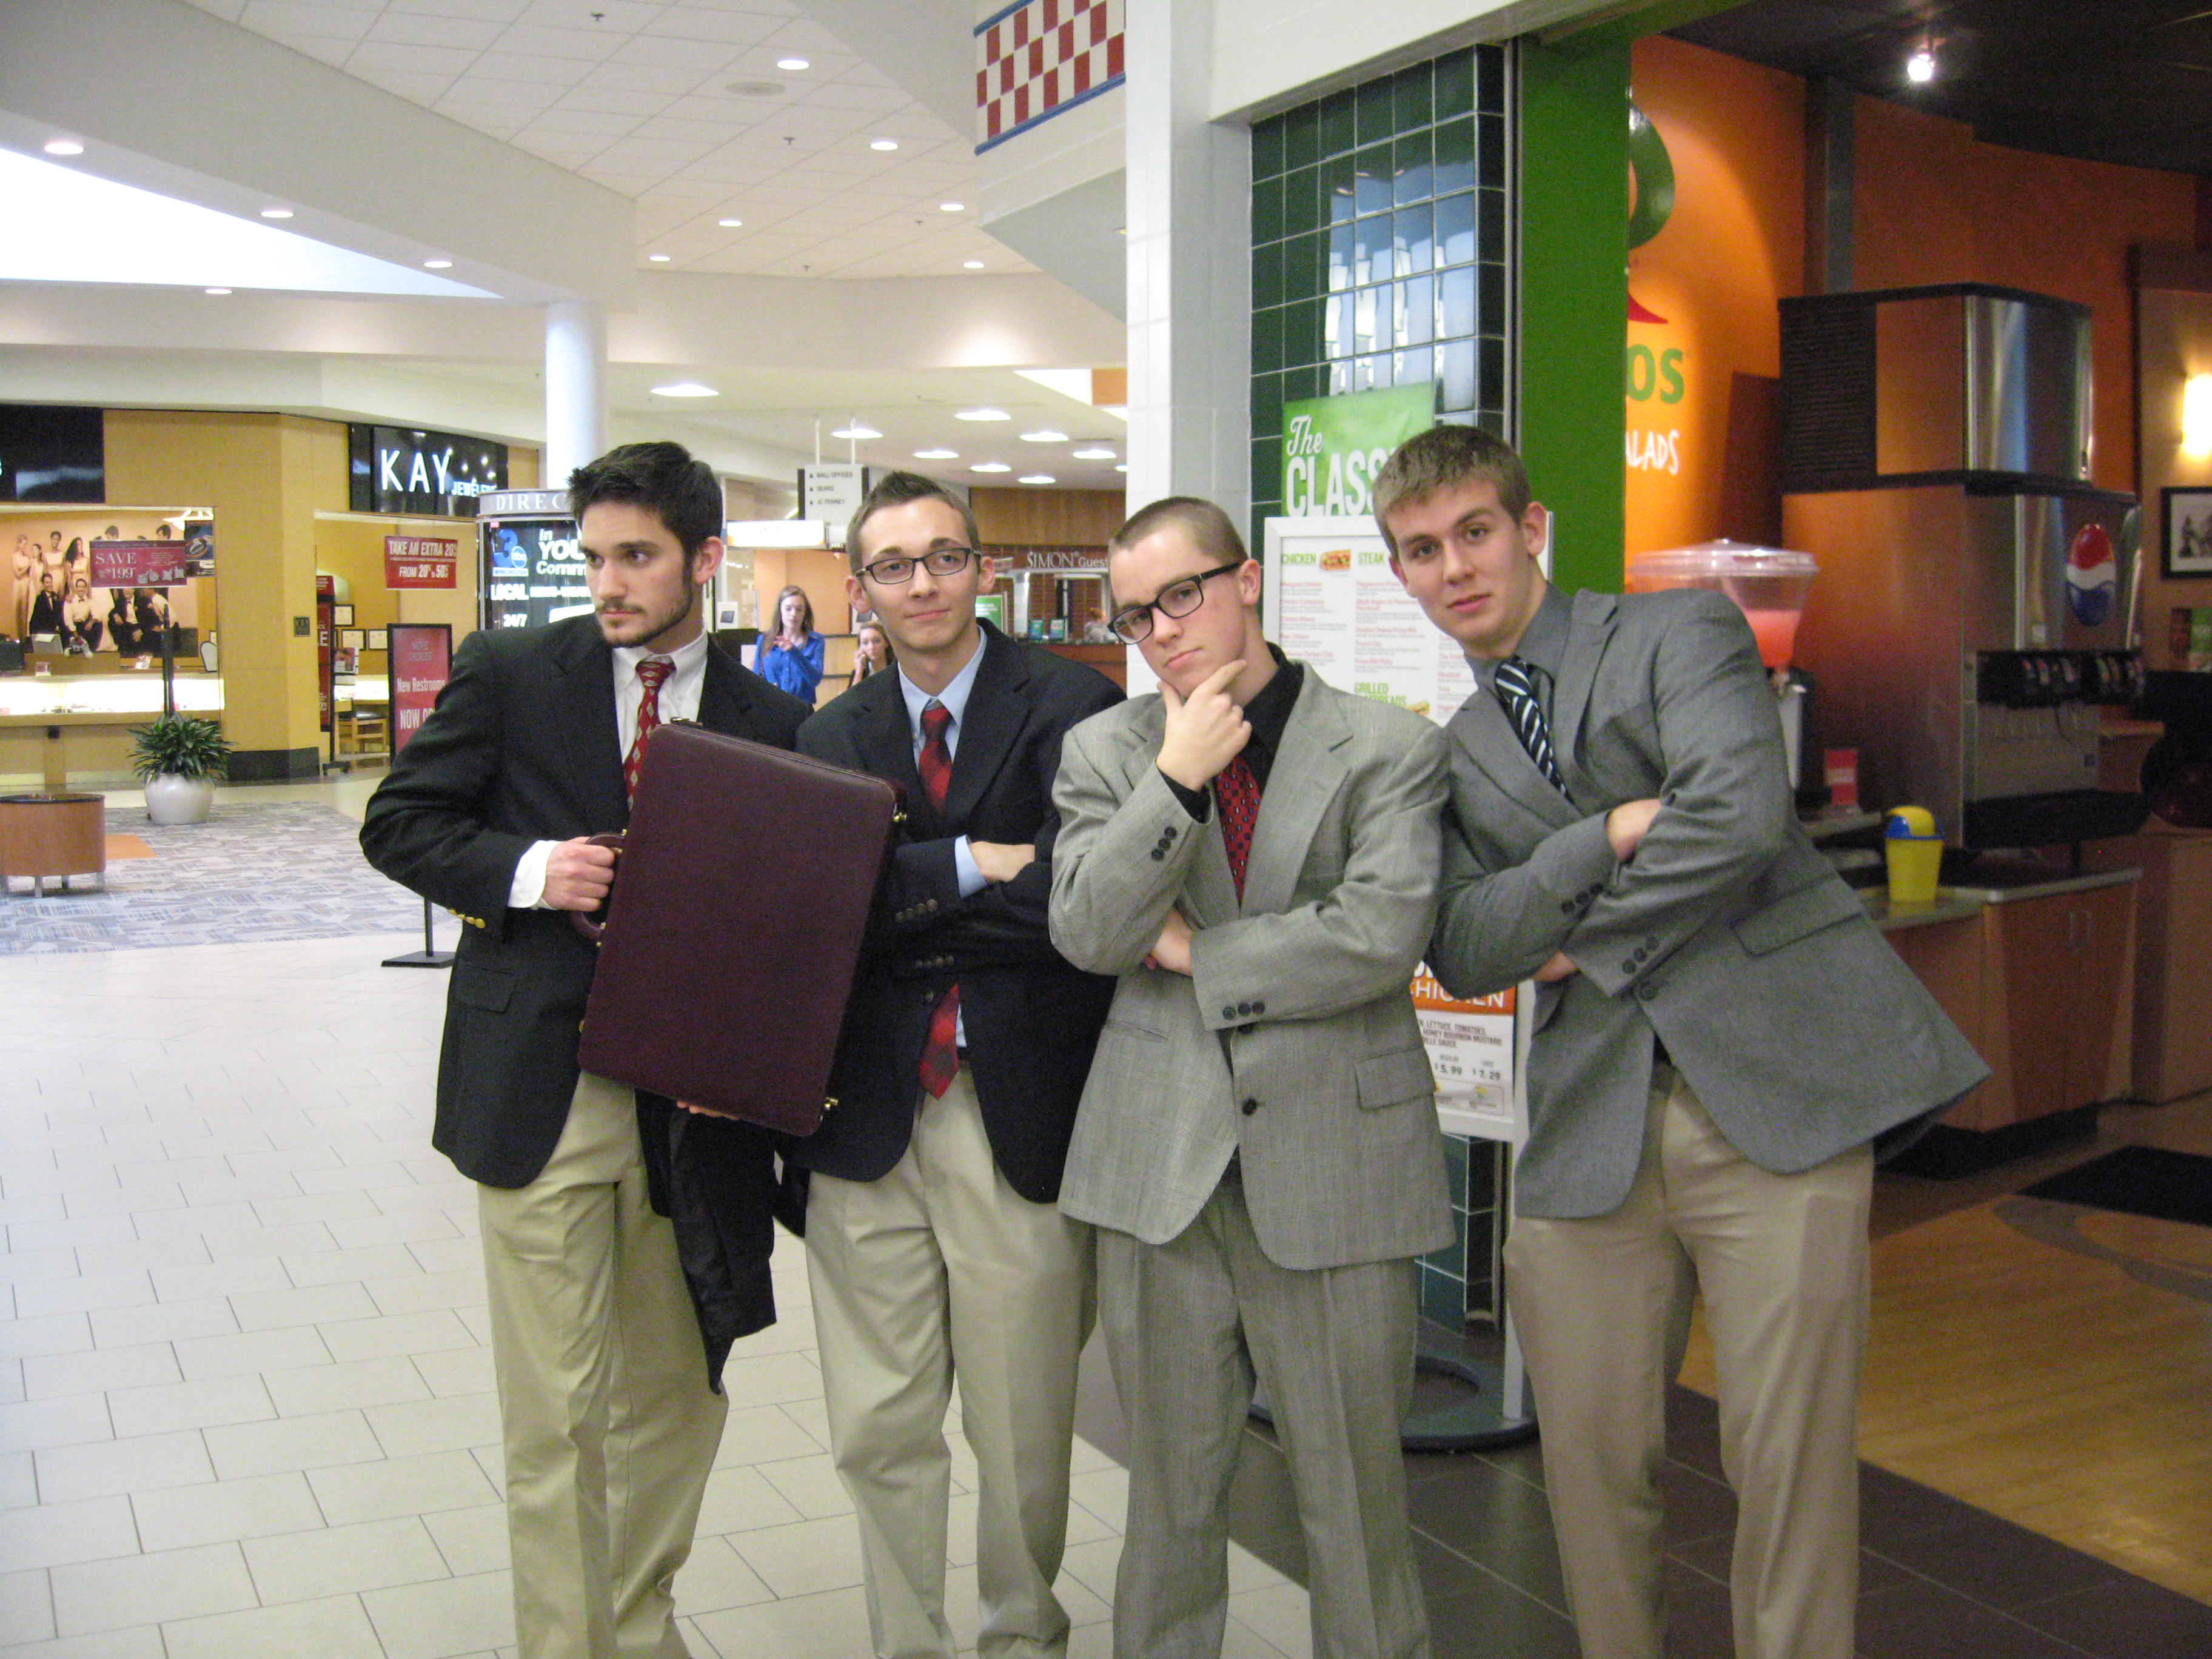 Seniors Colin Steves, Kevin Sanford, Casey Adamowicz and junior Brady Burr pose and prepare for DECA’s regional competition at the Apple Blossom Mall.